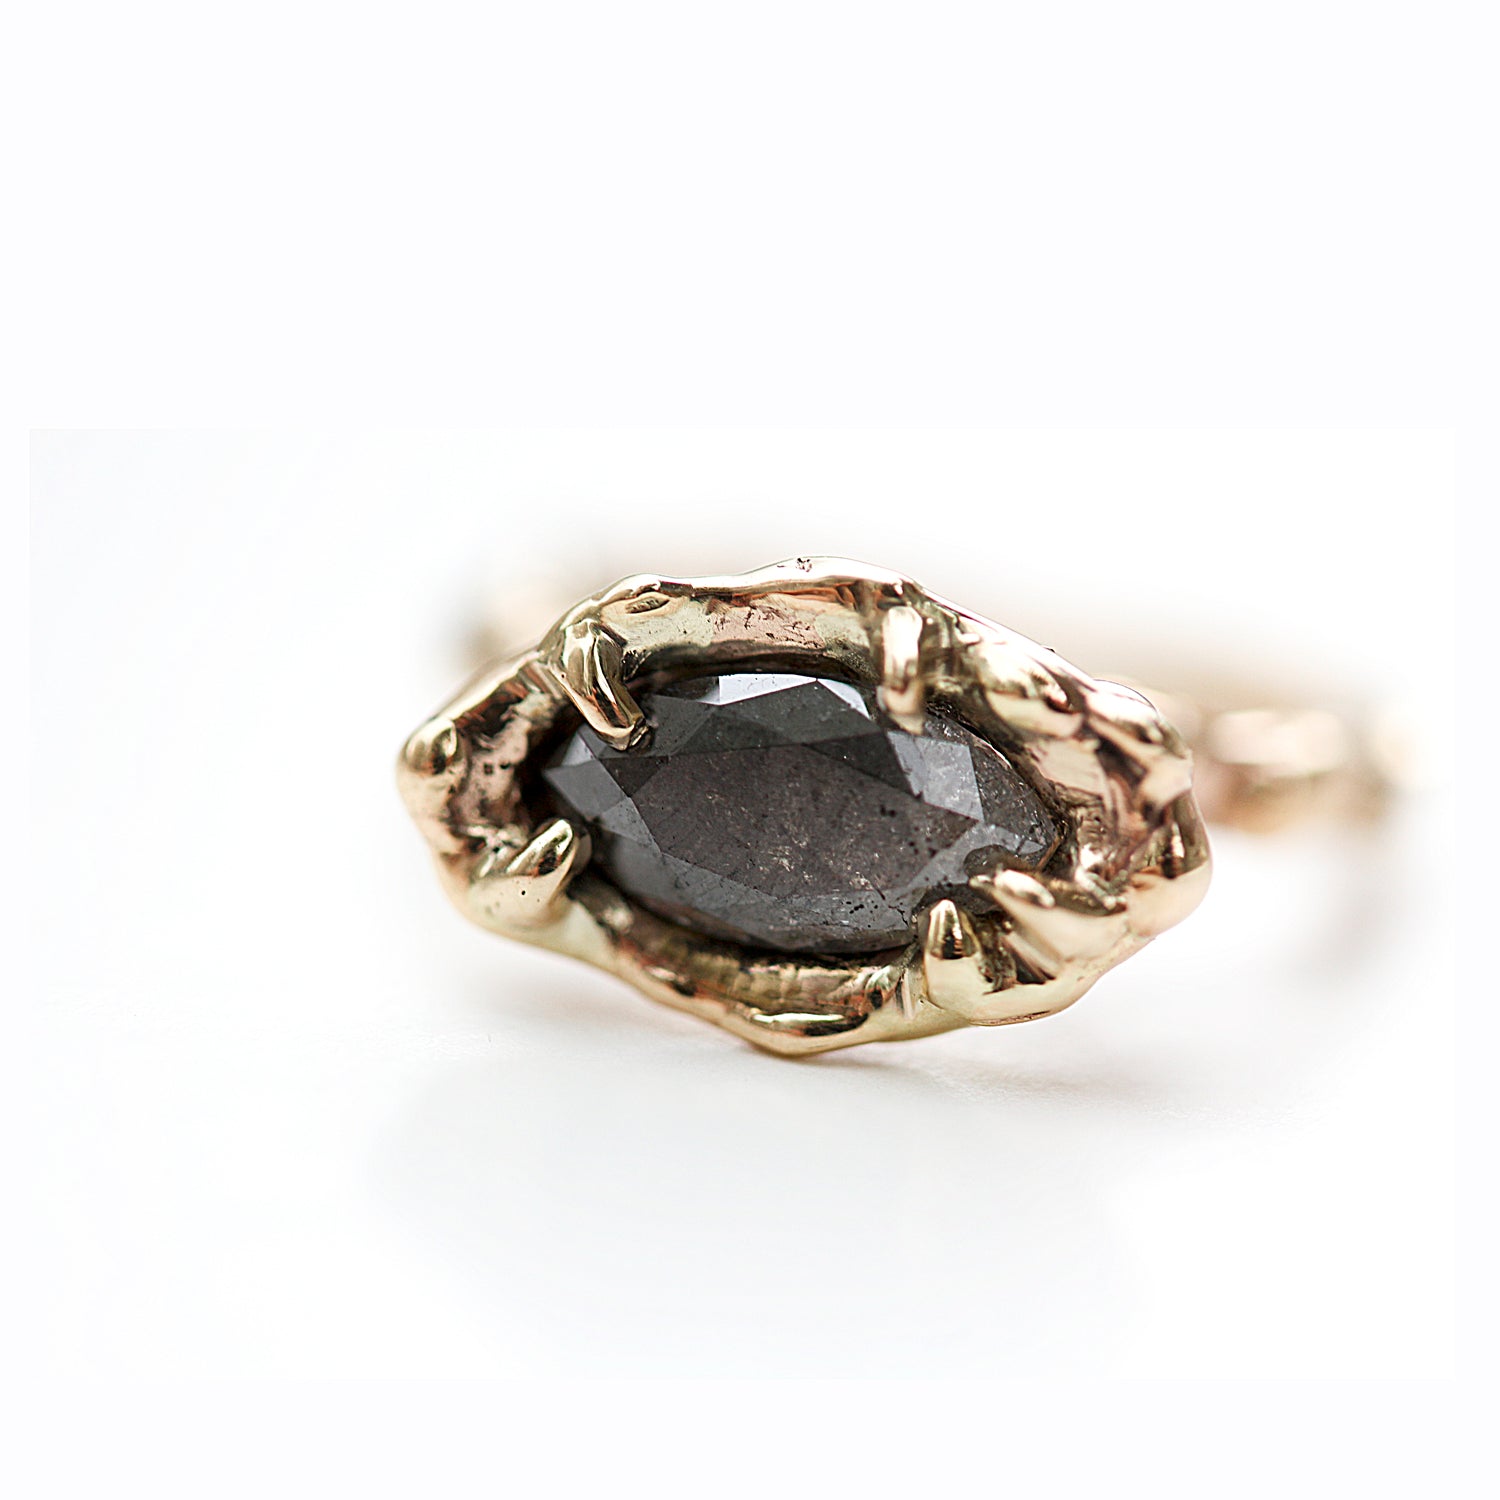 unique handmade rustic black ombre gray diamond engagement ring with hand wrought organic nature inspired dewdrop or water texture details